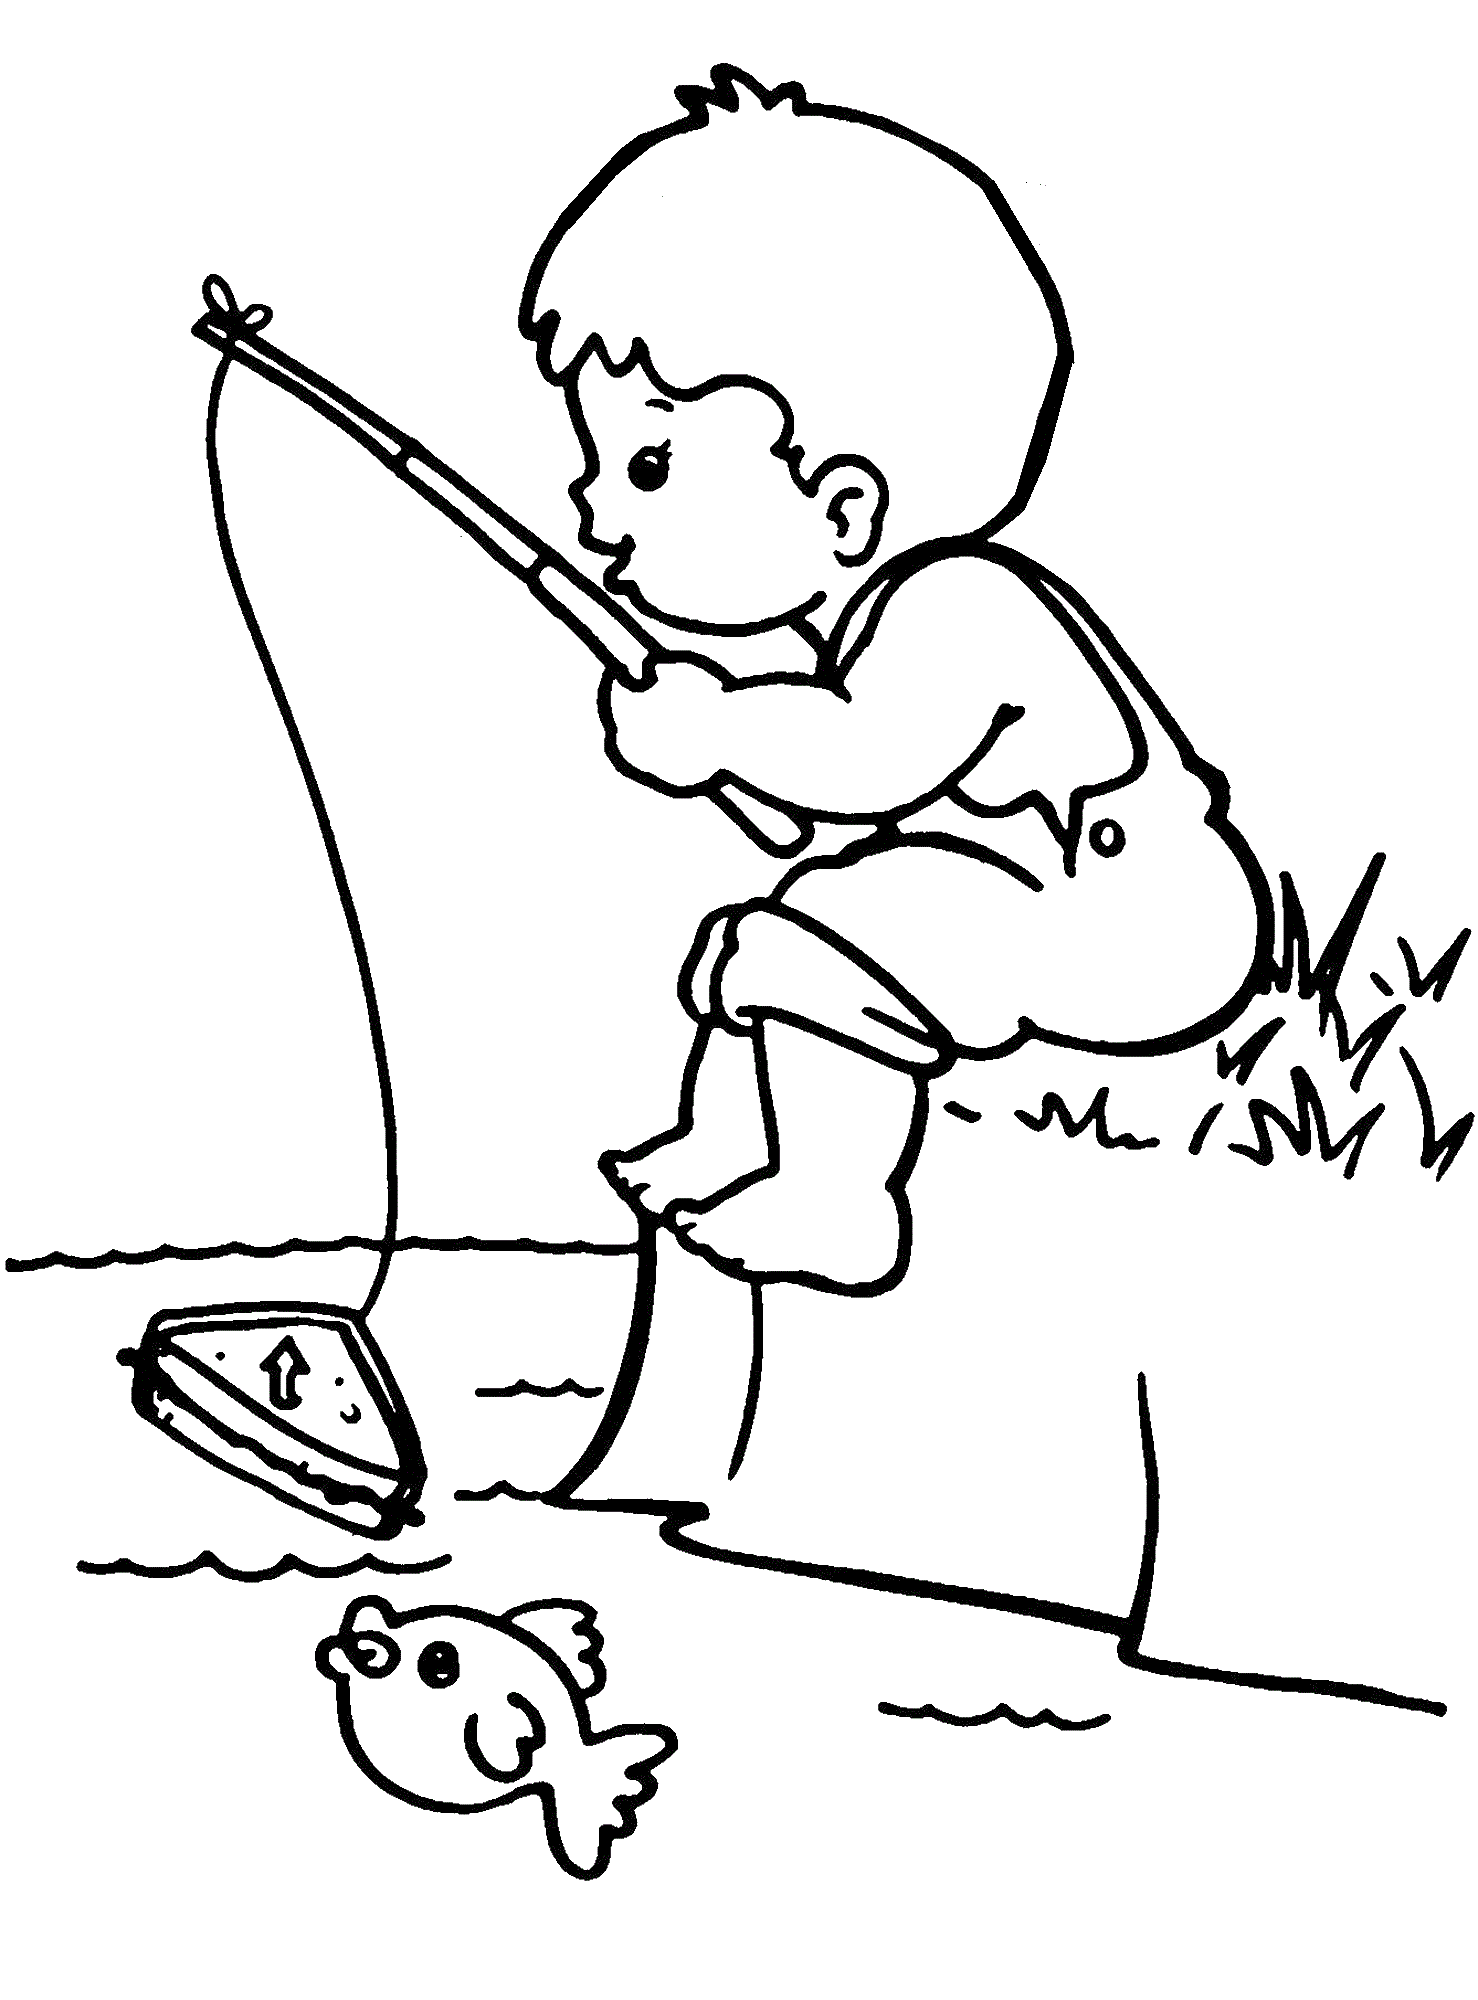 Free Printable Fishing Coloring Sheets Download Fishing Coloring For
Free